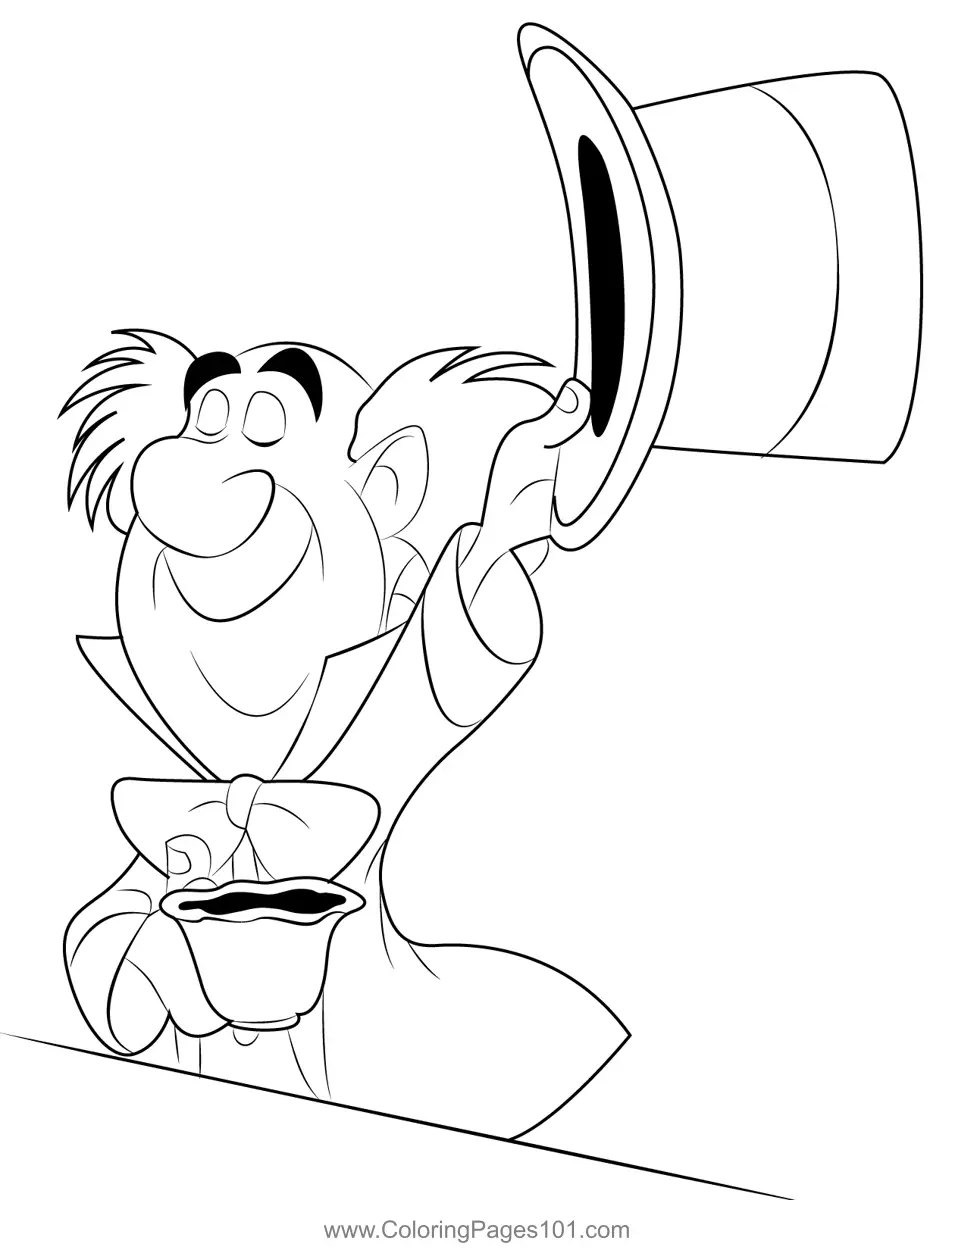 The Mad Hatter Coloring Page for Kids - Free Alice in Wonderland ...